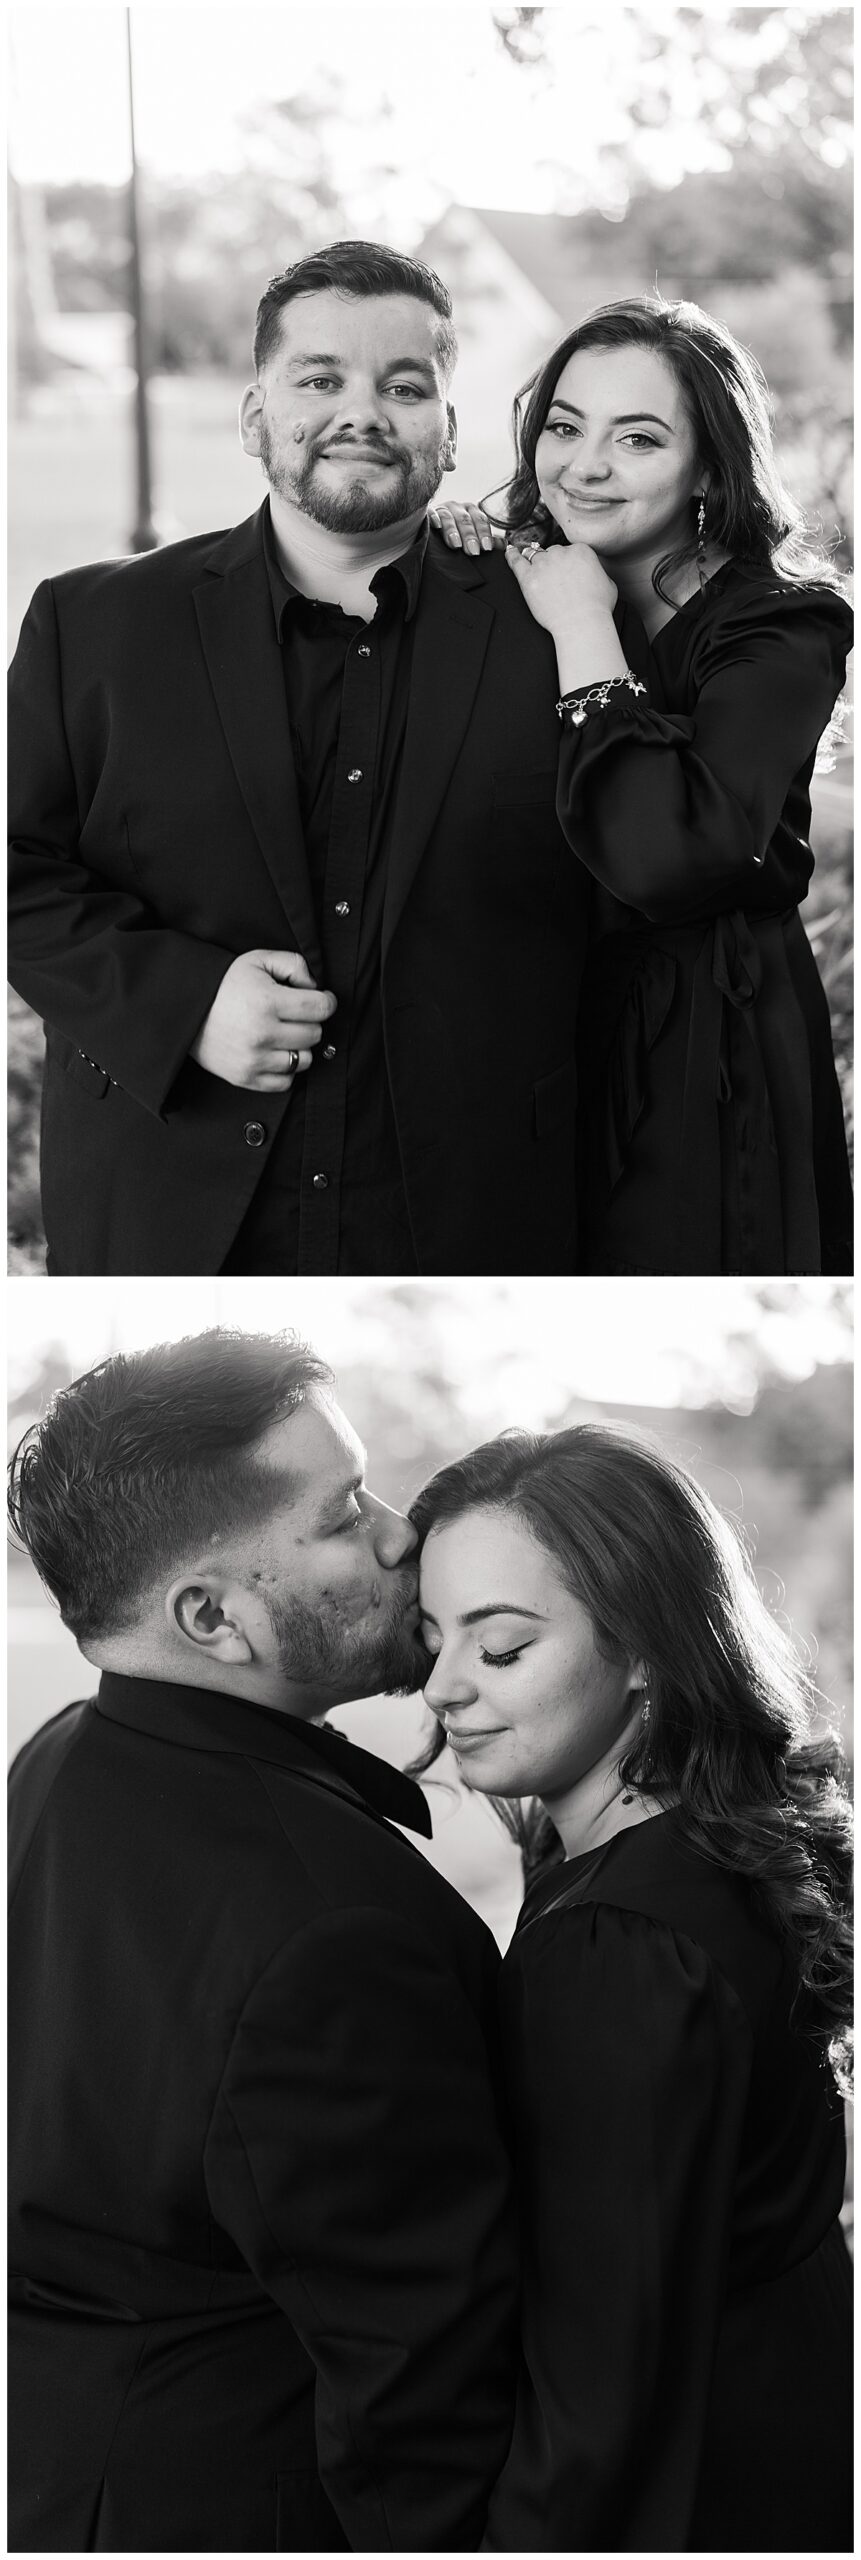 Couple smile together and cuddle in close for Houston’s Best Wedding Photographers